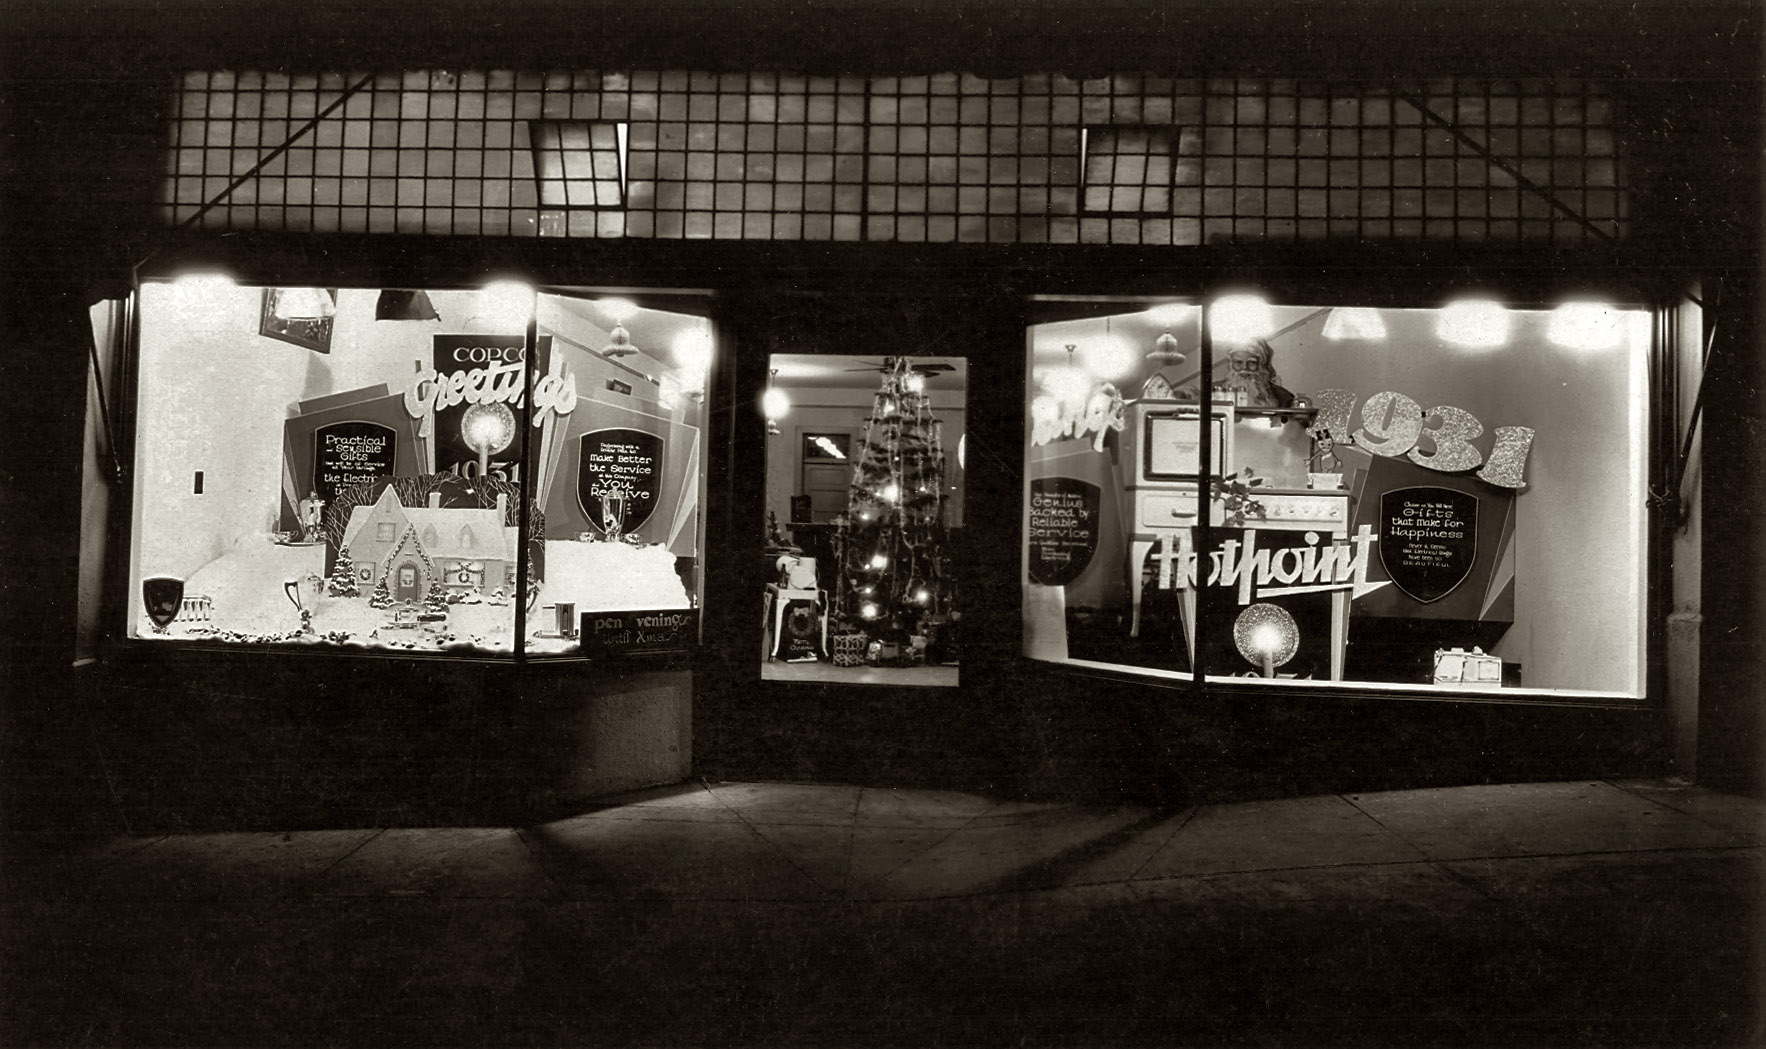 An appliance store at night. Christmas 1931. View full size.